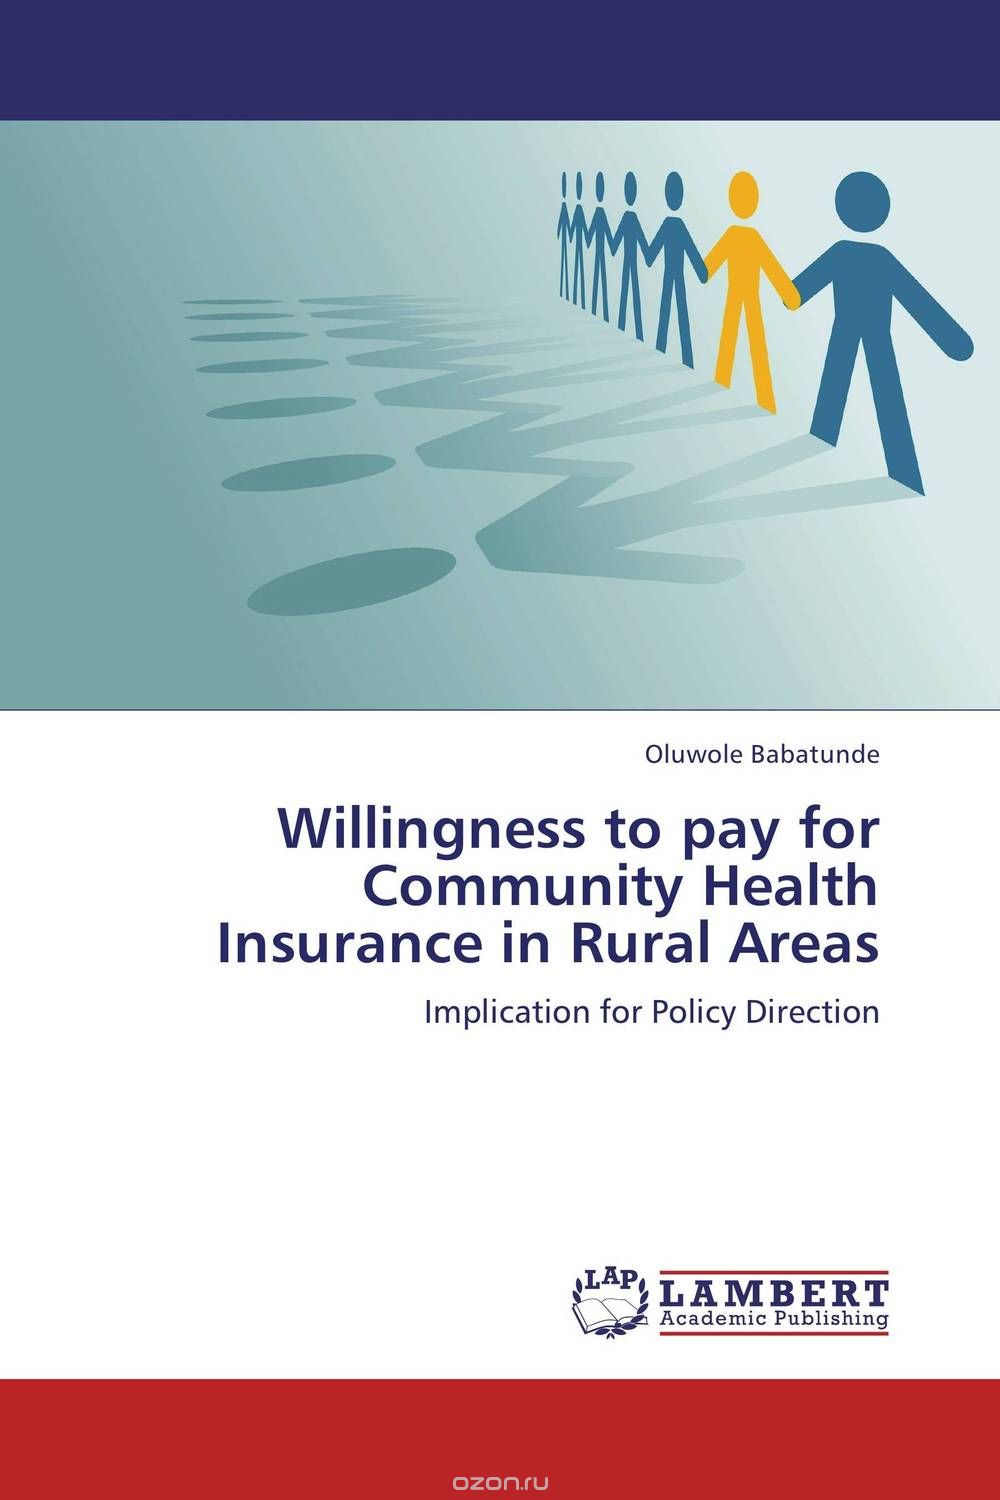 Скачать книгу "Willingness to pay for Community Health Insurance in Rural Areas"